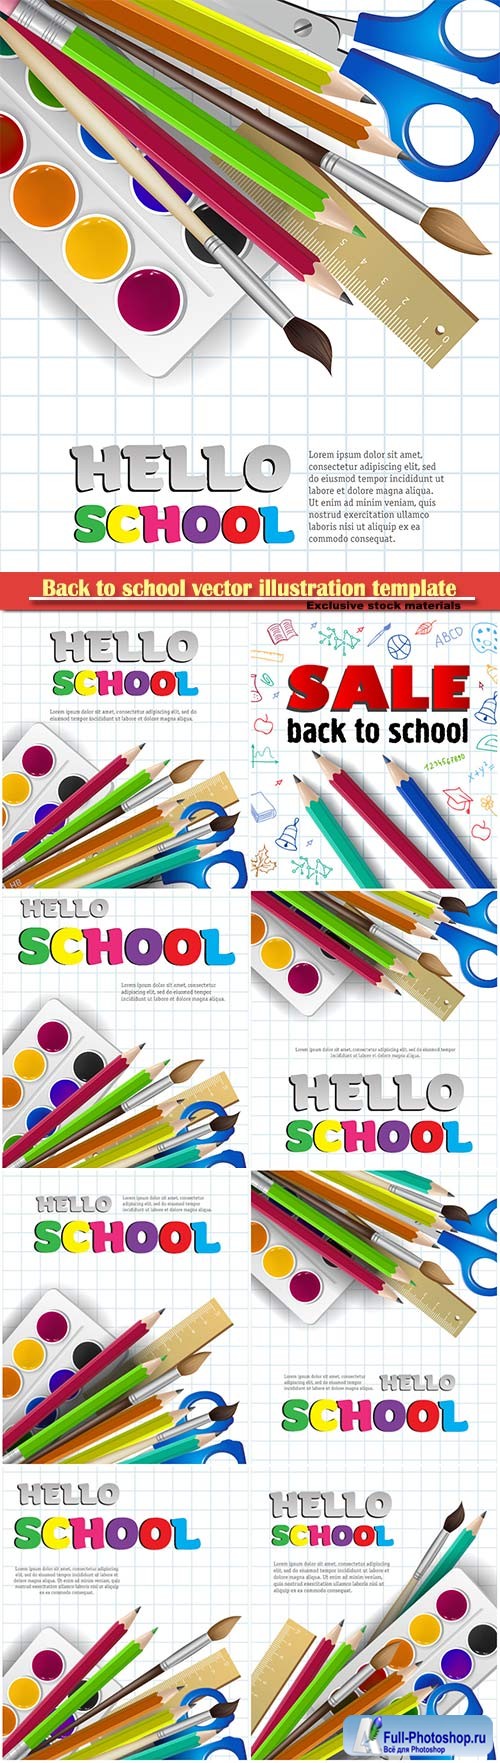 Back to school vector illustration template # 7